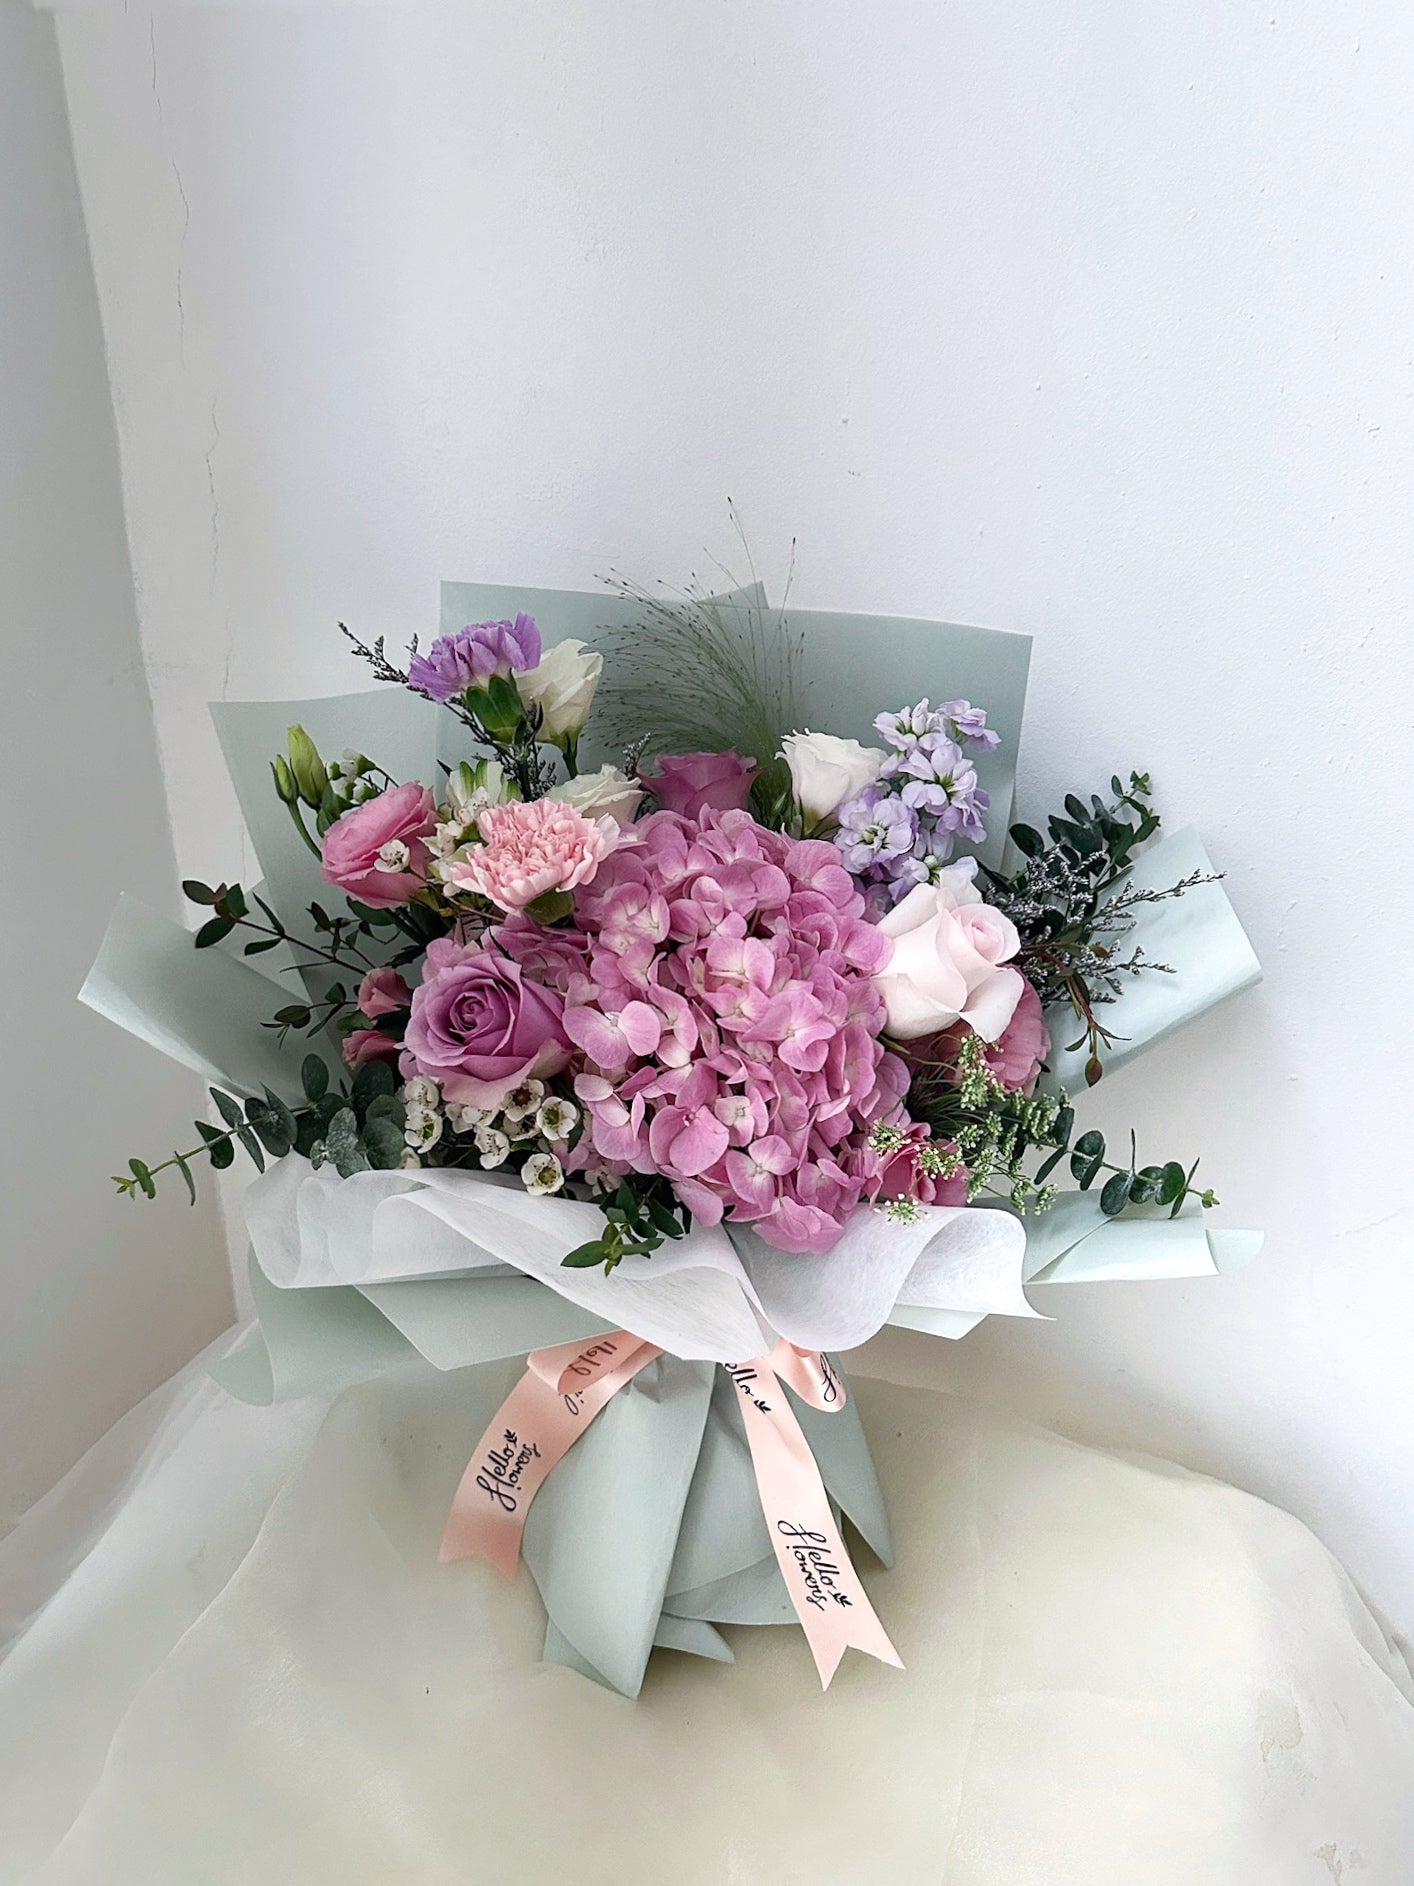 Enchanted Bouquet/Vase - Pink hydrangea with lilacs and pastel pinks